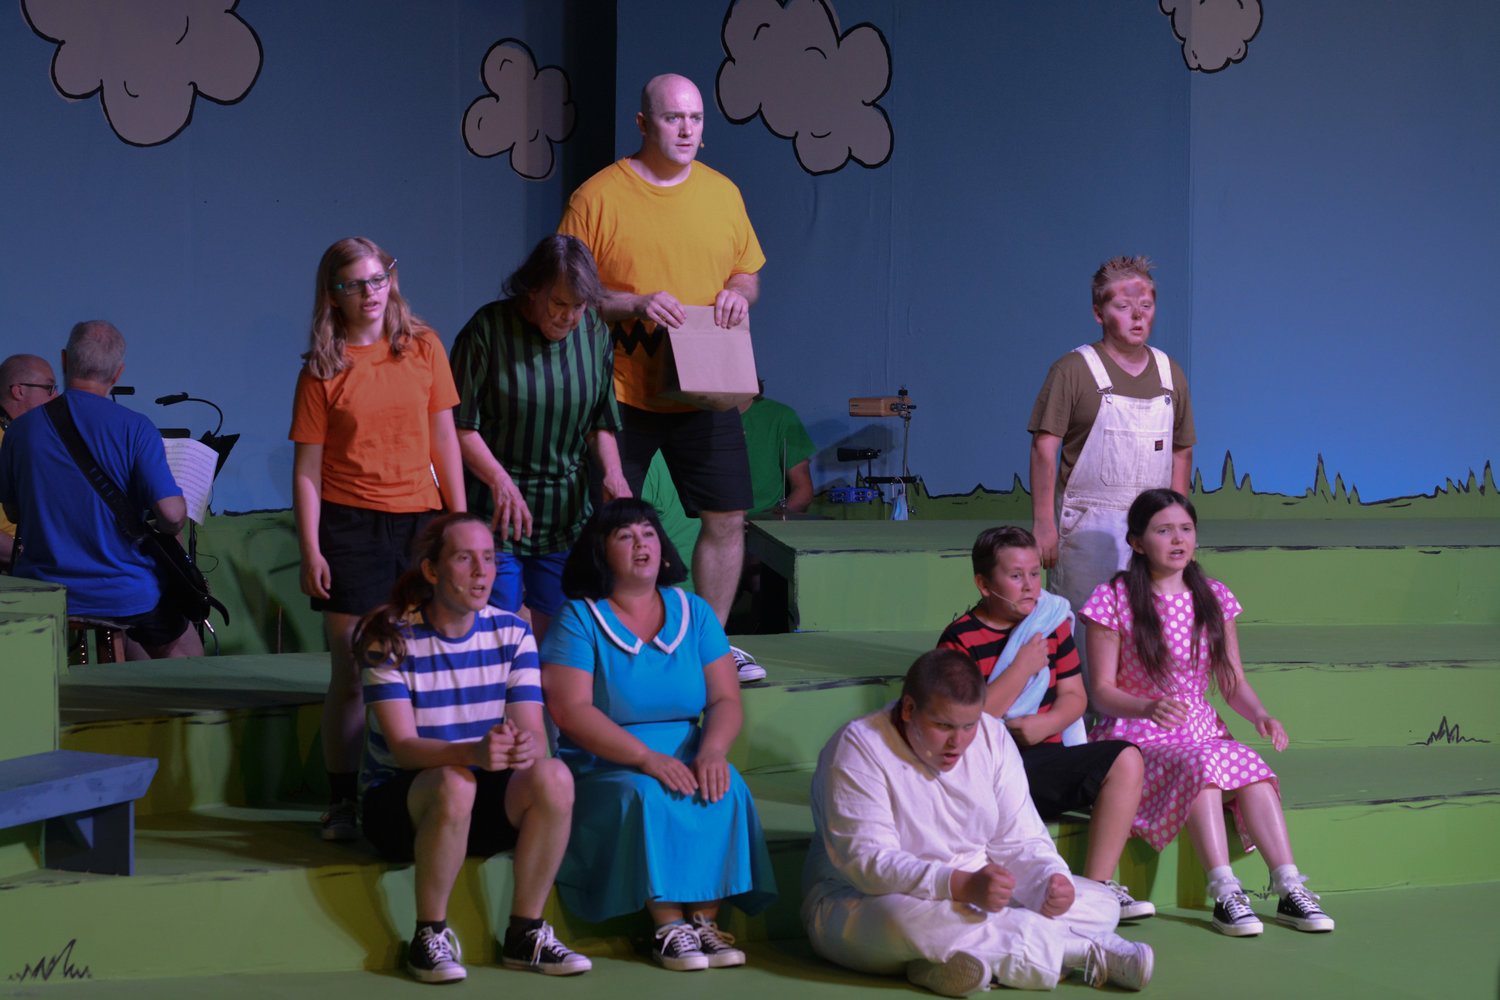 The entire cast took the stage to perform a rendition of “You’re a Good Man, Charlie Brown.”